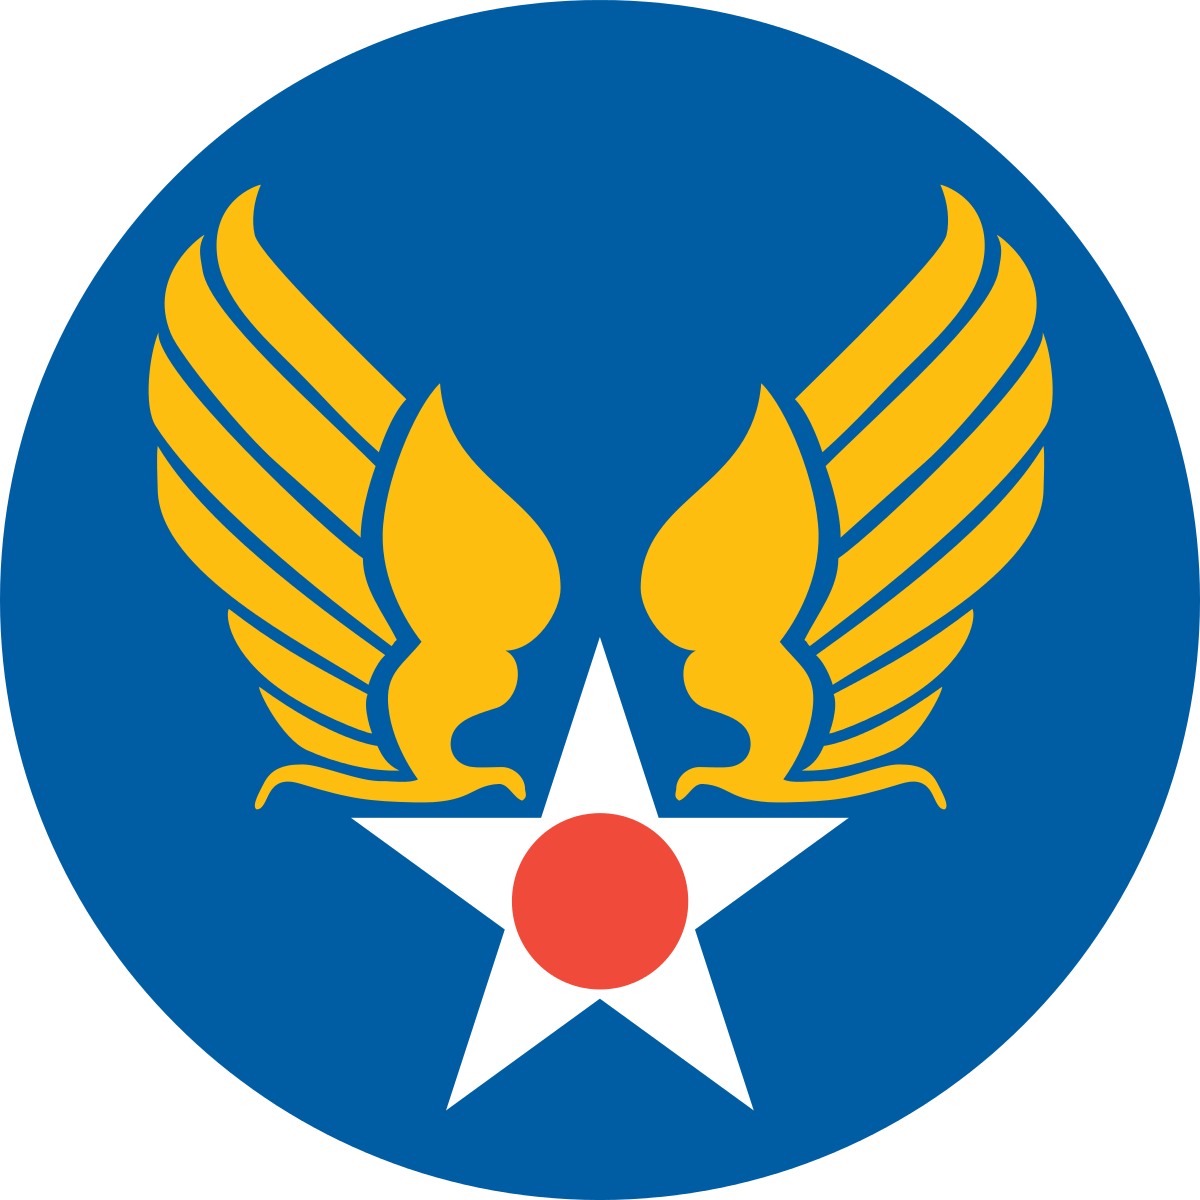 Large Air Force Logo - United States Army Air Forces